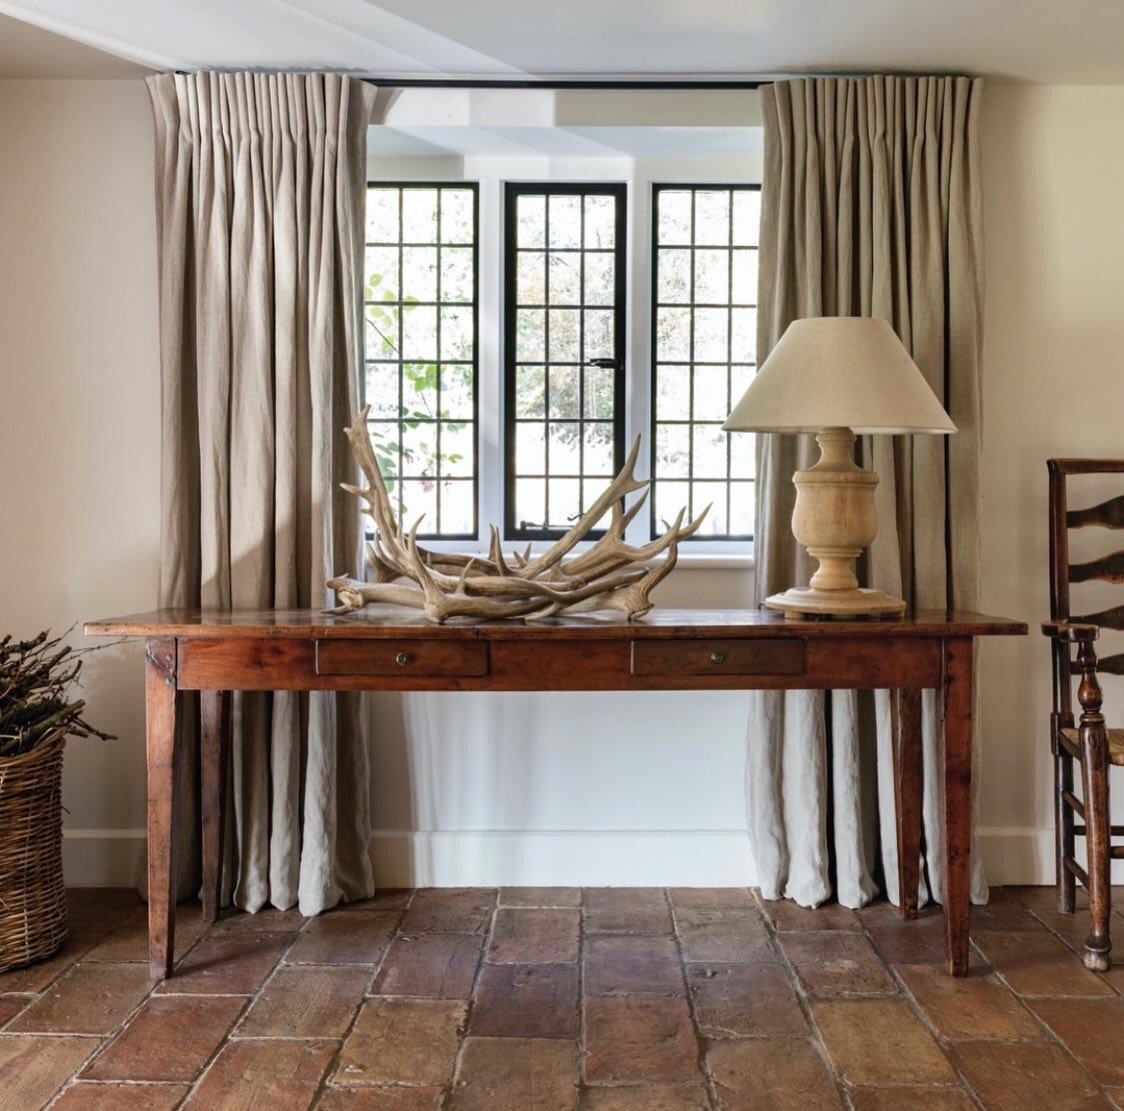 A classic country welcome 🤎

In this entrance hall from our Wiltshire project, reclaimed terracotta tiles give a warm and relaxed finish whilst also being hard wearing. Neutral heavy weight linen curtains add further texture, and the antique furnitu